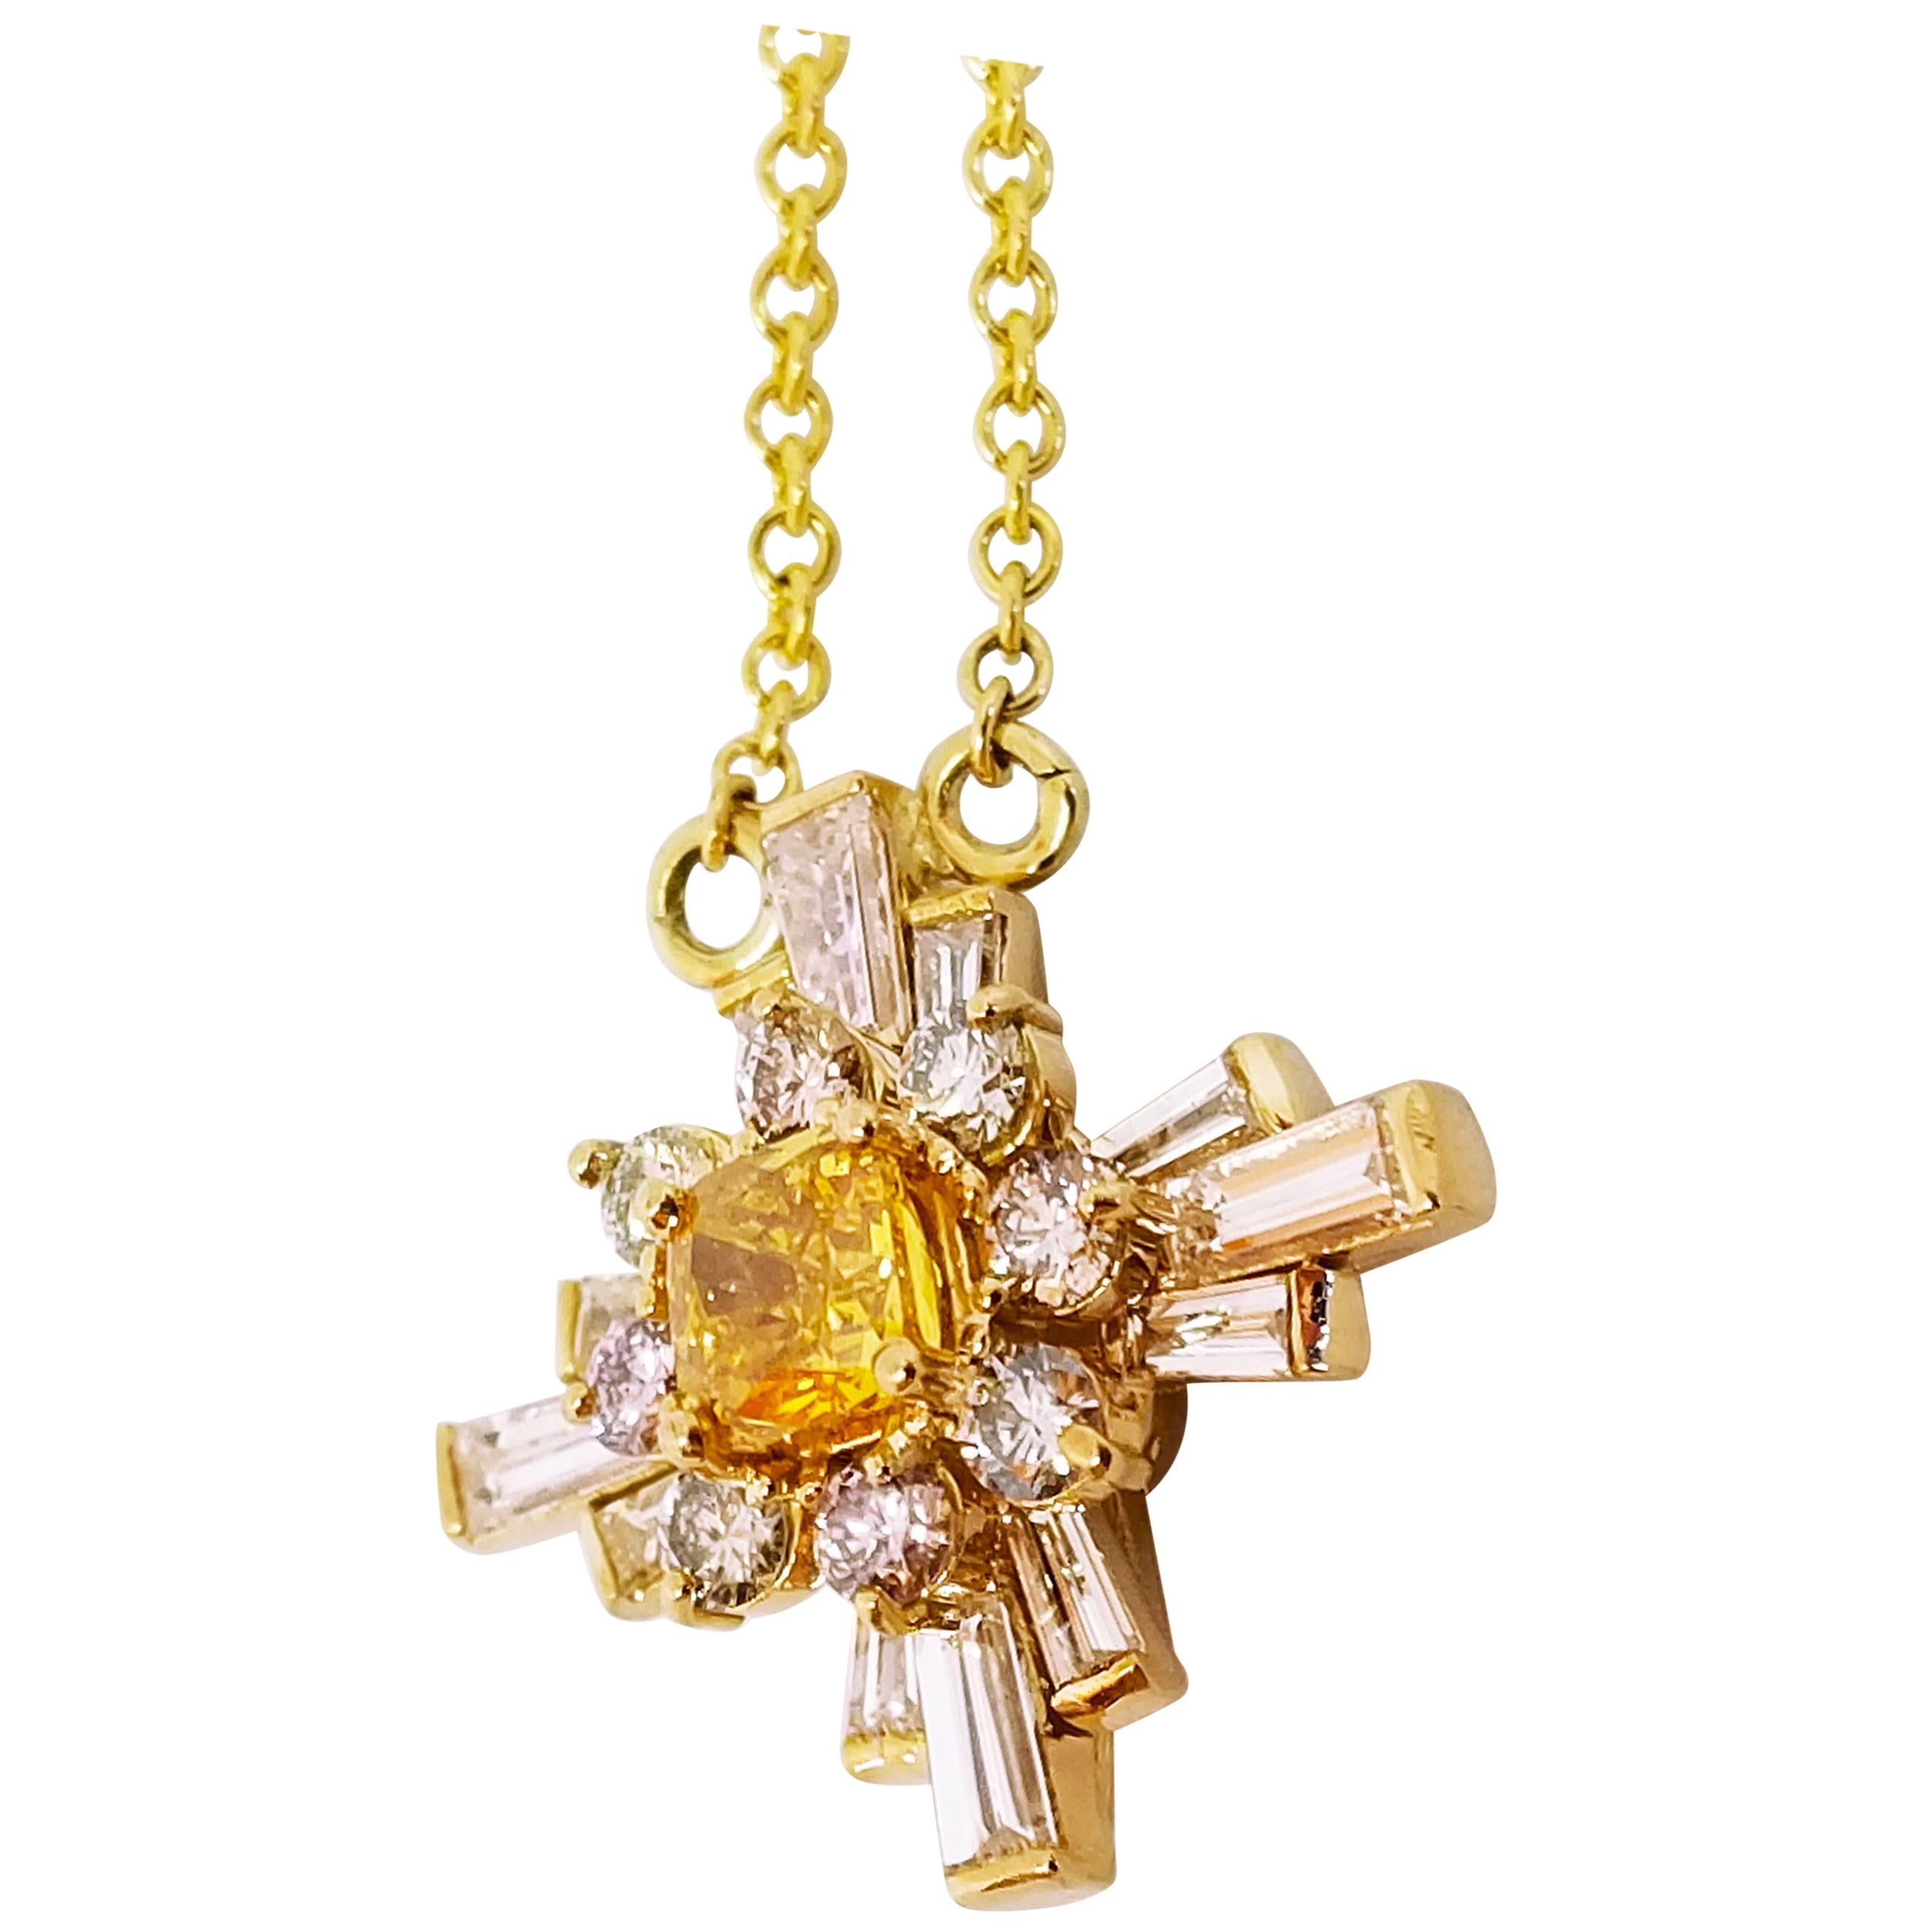 This One of a Kind, Star Cross Pendant Necklace features a Collection of Natural Fancy Color Diamonds. The nine Natural Color Fancy Diamonds in the Pendant have a combined weight of 1.0 Carat and feature a Beautiful and Rare Cushion Cut, 0.61 Carat,